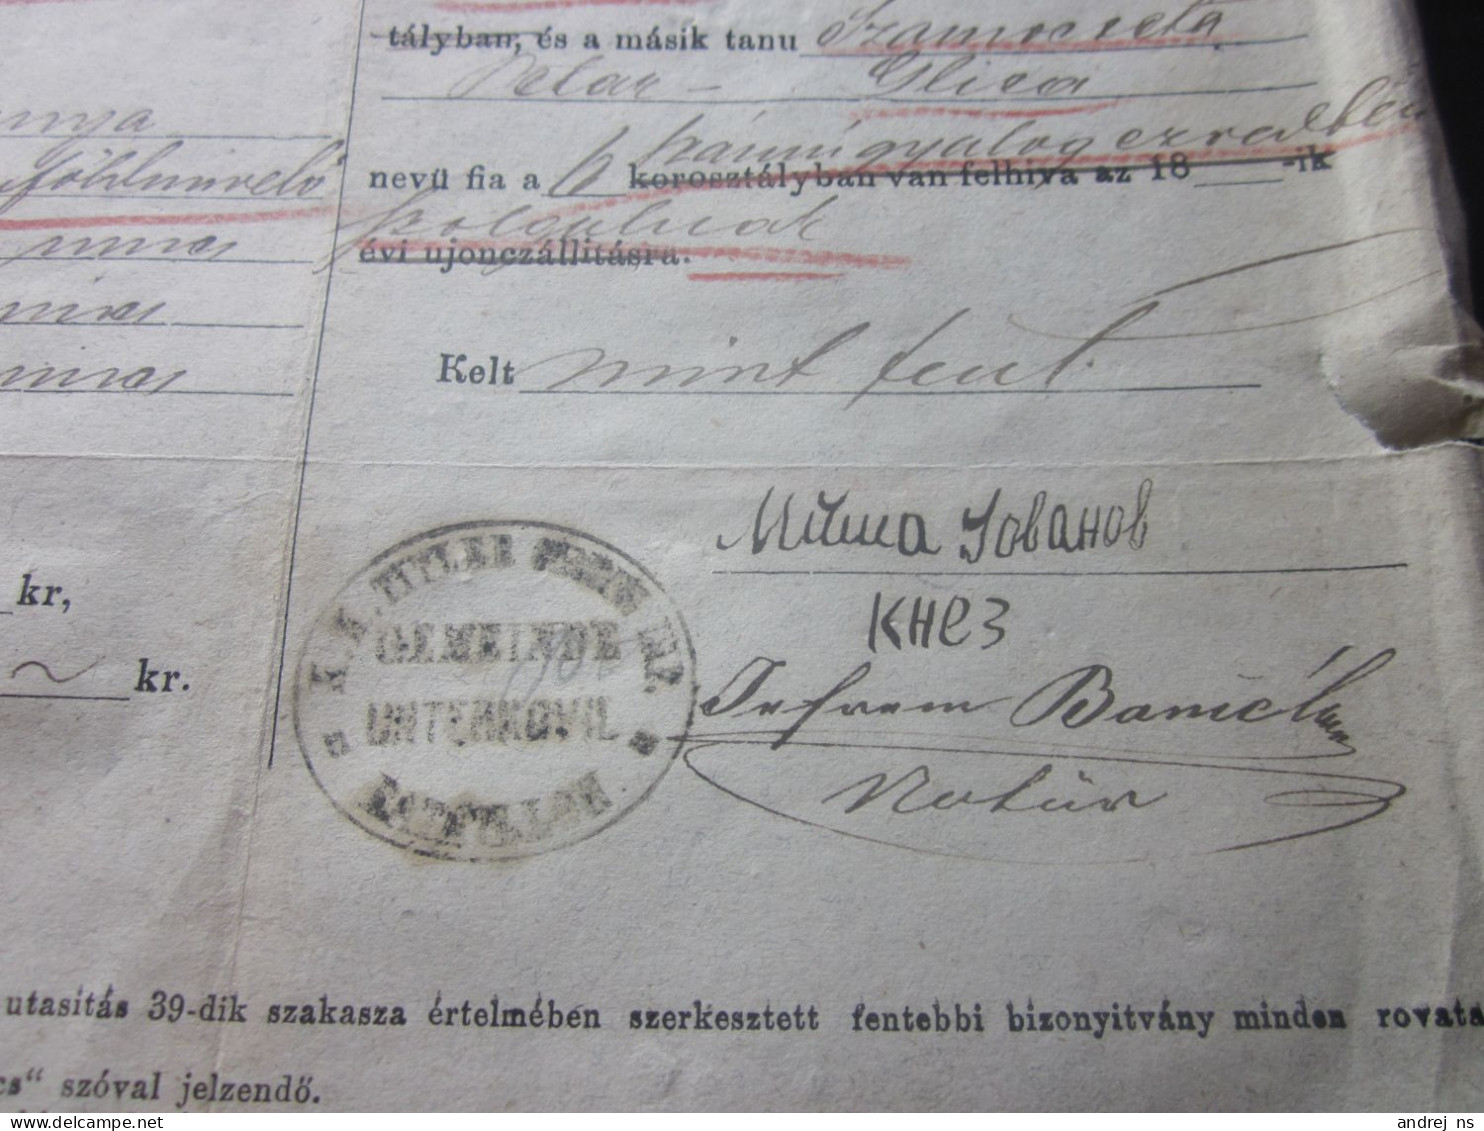 Also Kovilj Kovilj 1874 Knez Misa Jovanov Signatures The Prince's Signature On The Contract For The Sale Of 27 Juger Jug - Historical Documents